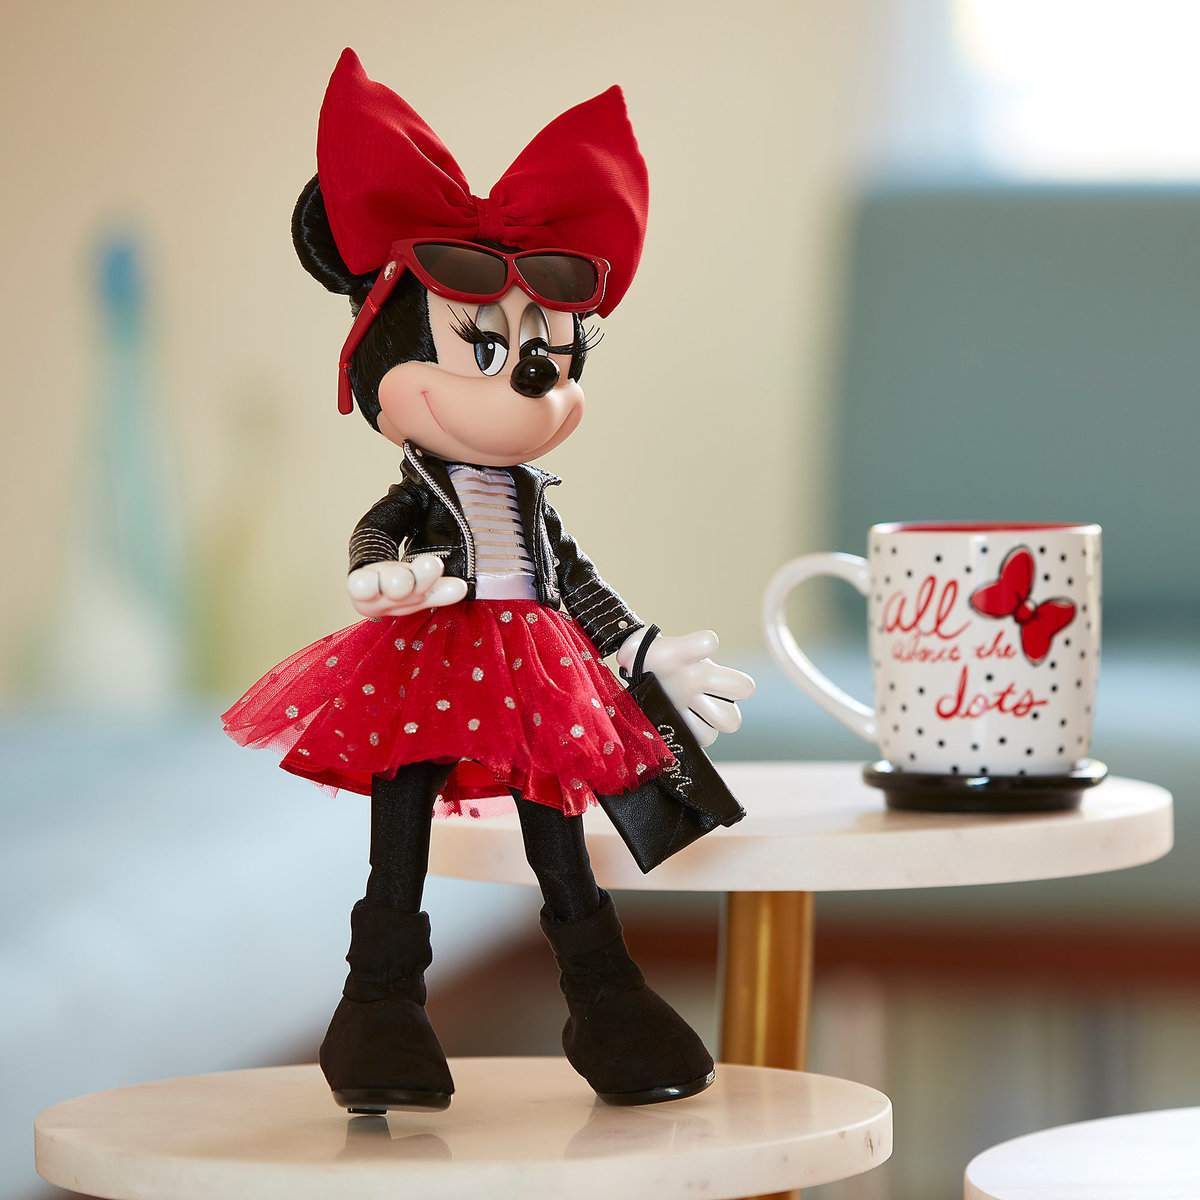 minnie mouse limited edition doll 2018